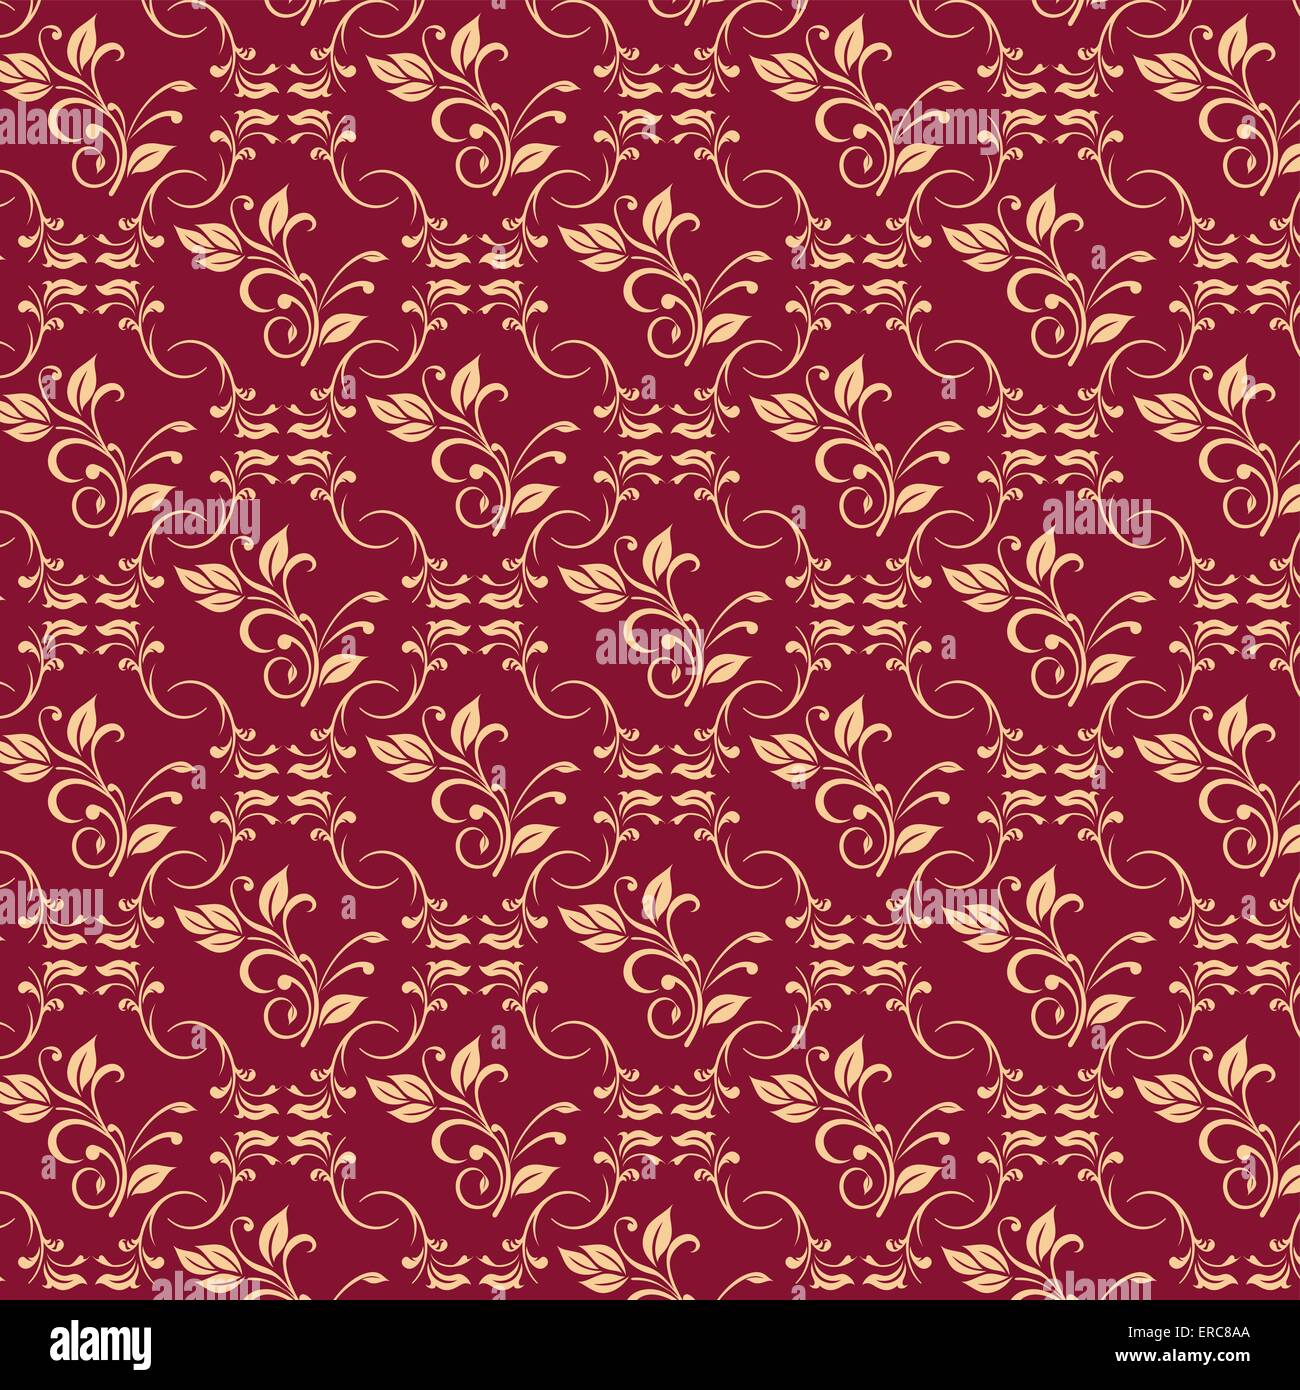 Burgundy Fabric Wallpaper and Home Decor  Spoonflower